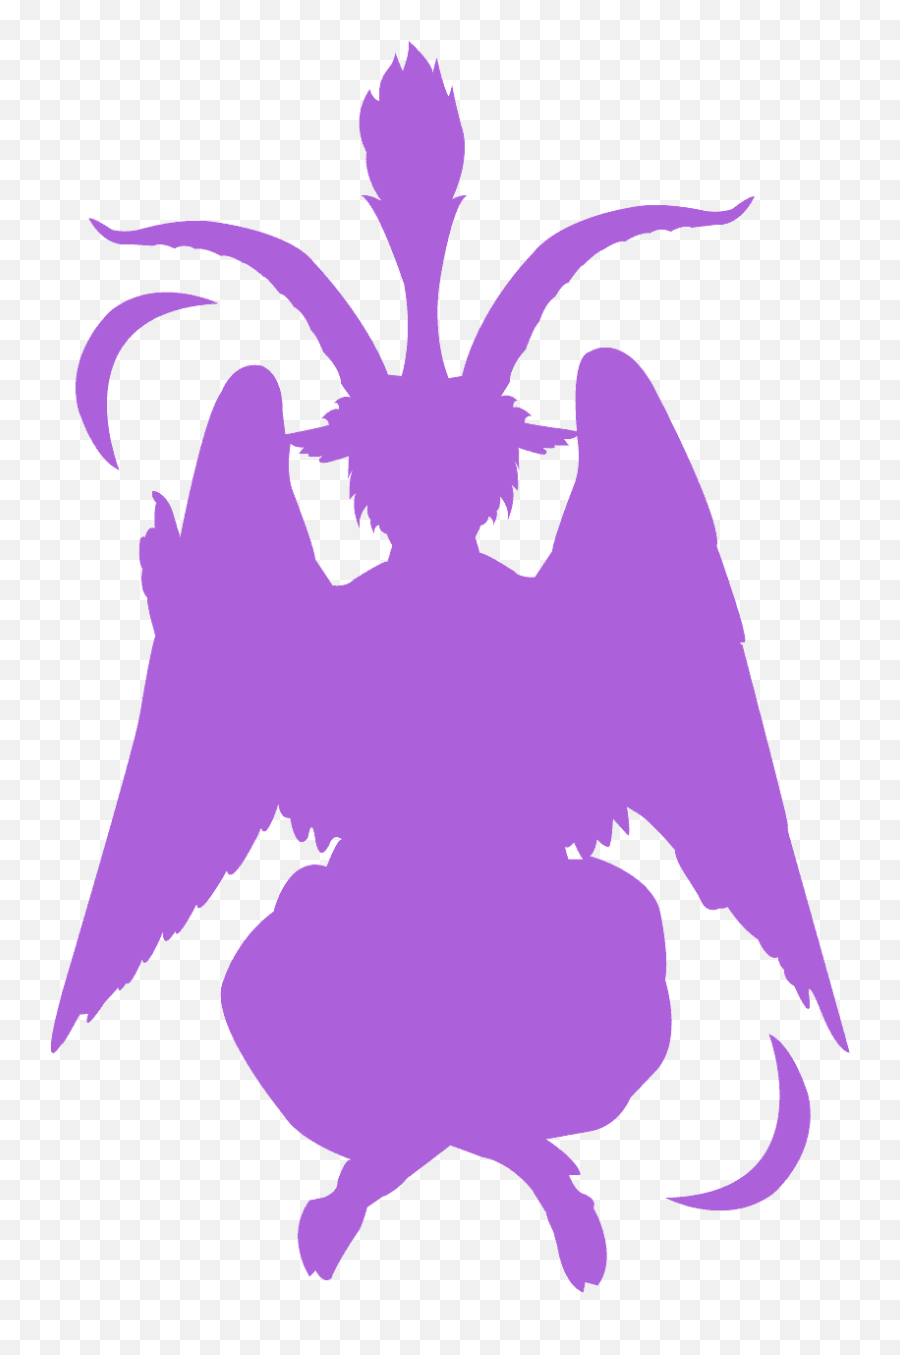 Baphomet Silhouette - Free Vector Silhouettes Creazilla Baphomet Silhouette Png,Baphomet Png